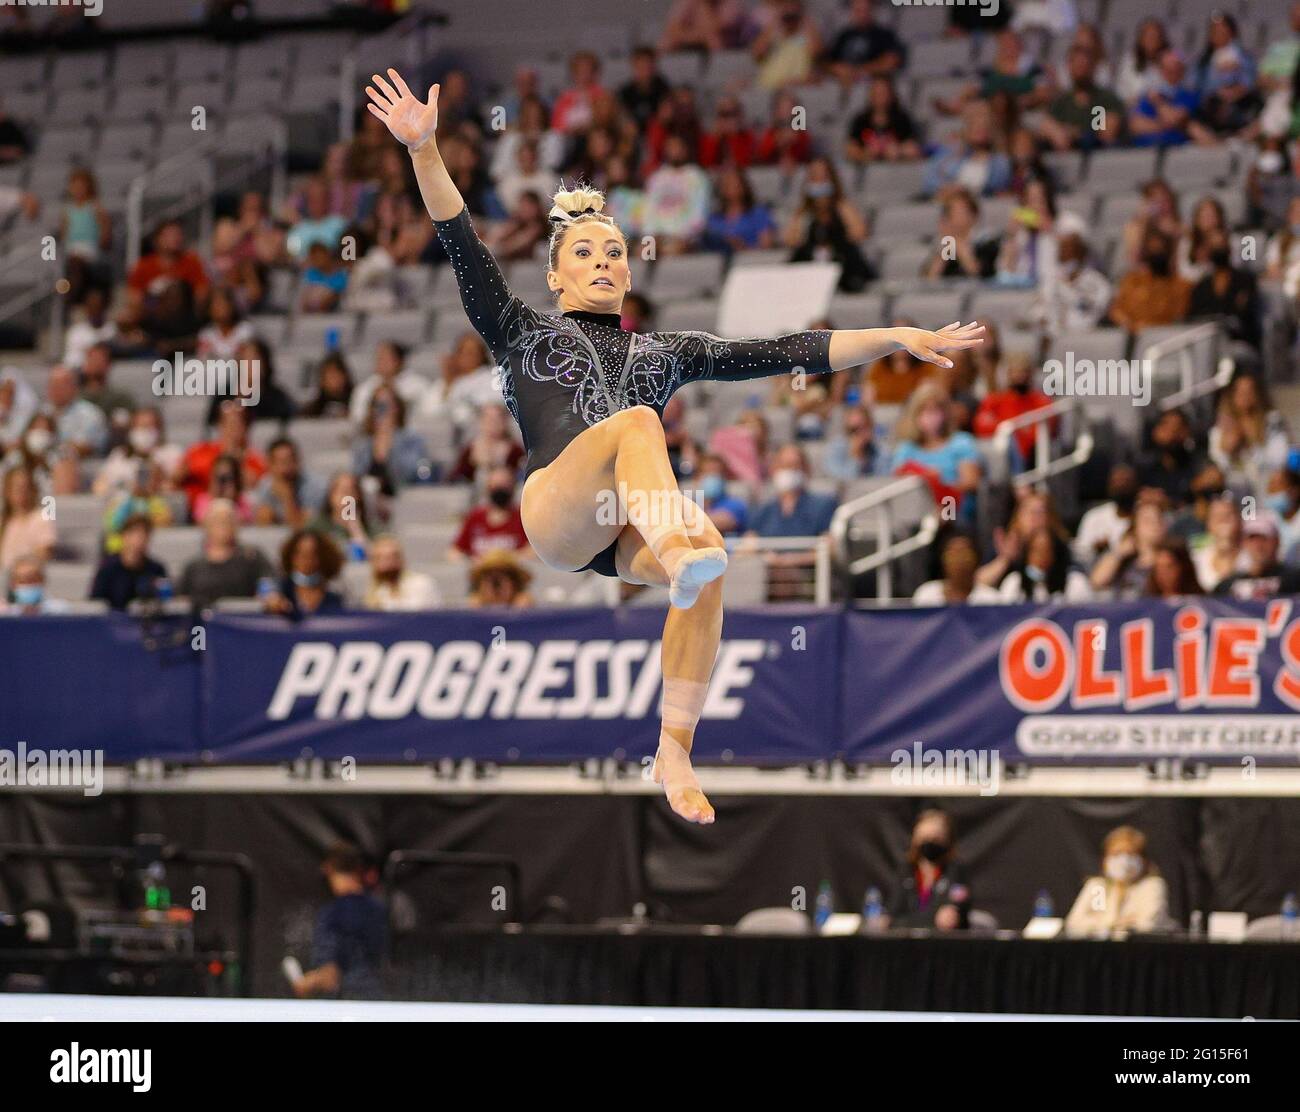 Texas, USA. 04th June, 2021. June 4, 2021: MyKayla Skinner does a tumbling pass during Day 1 of the 2021 U.S. Gymnastics Championships at Dickies Arena in Fort Worth, TX. Kyle Okita/CSM Credit: Cal Sport Media/Alamy Live News Stock Photo